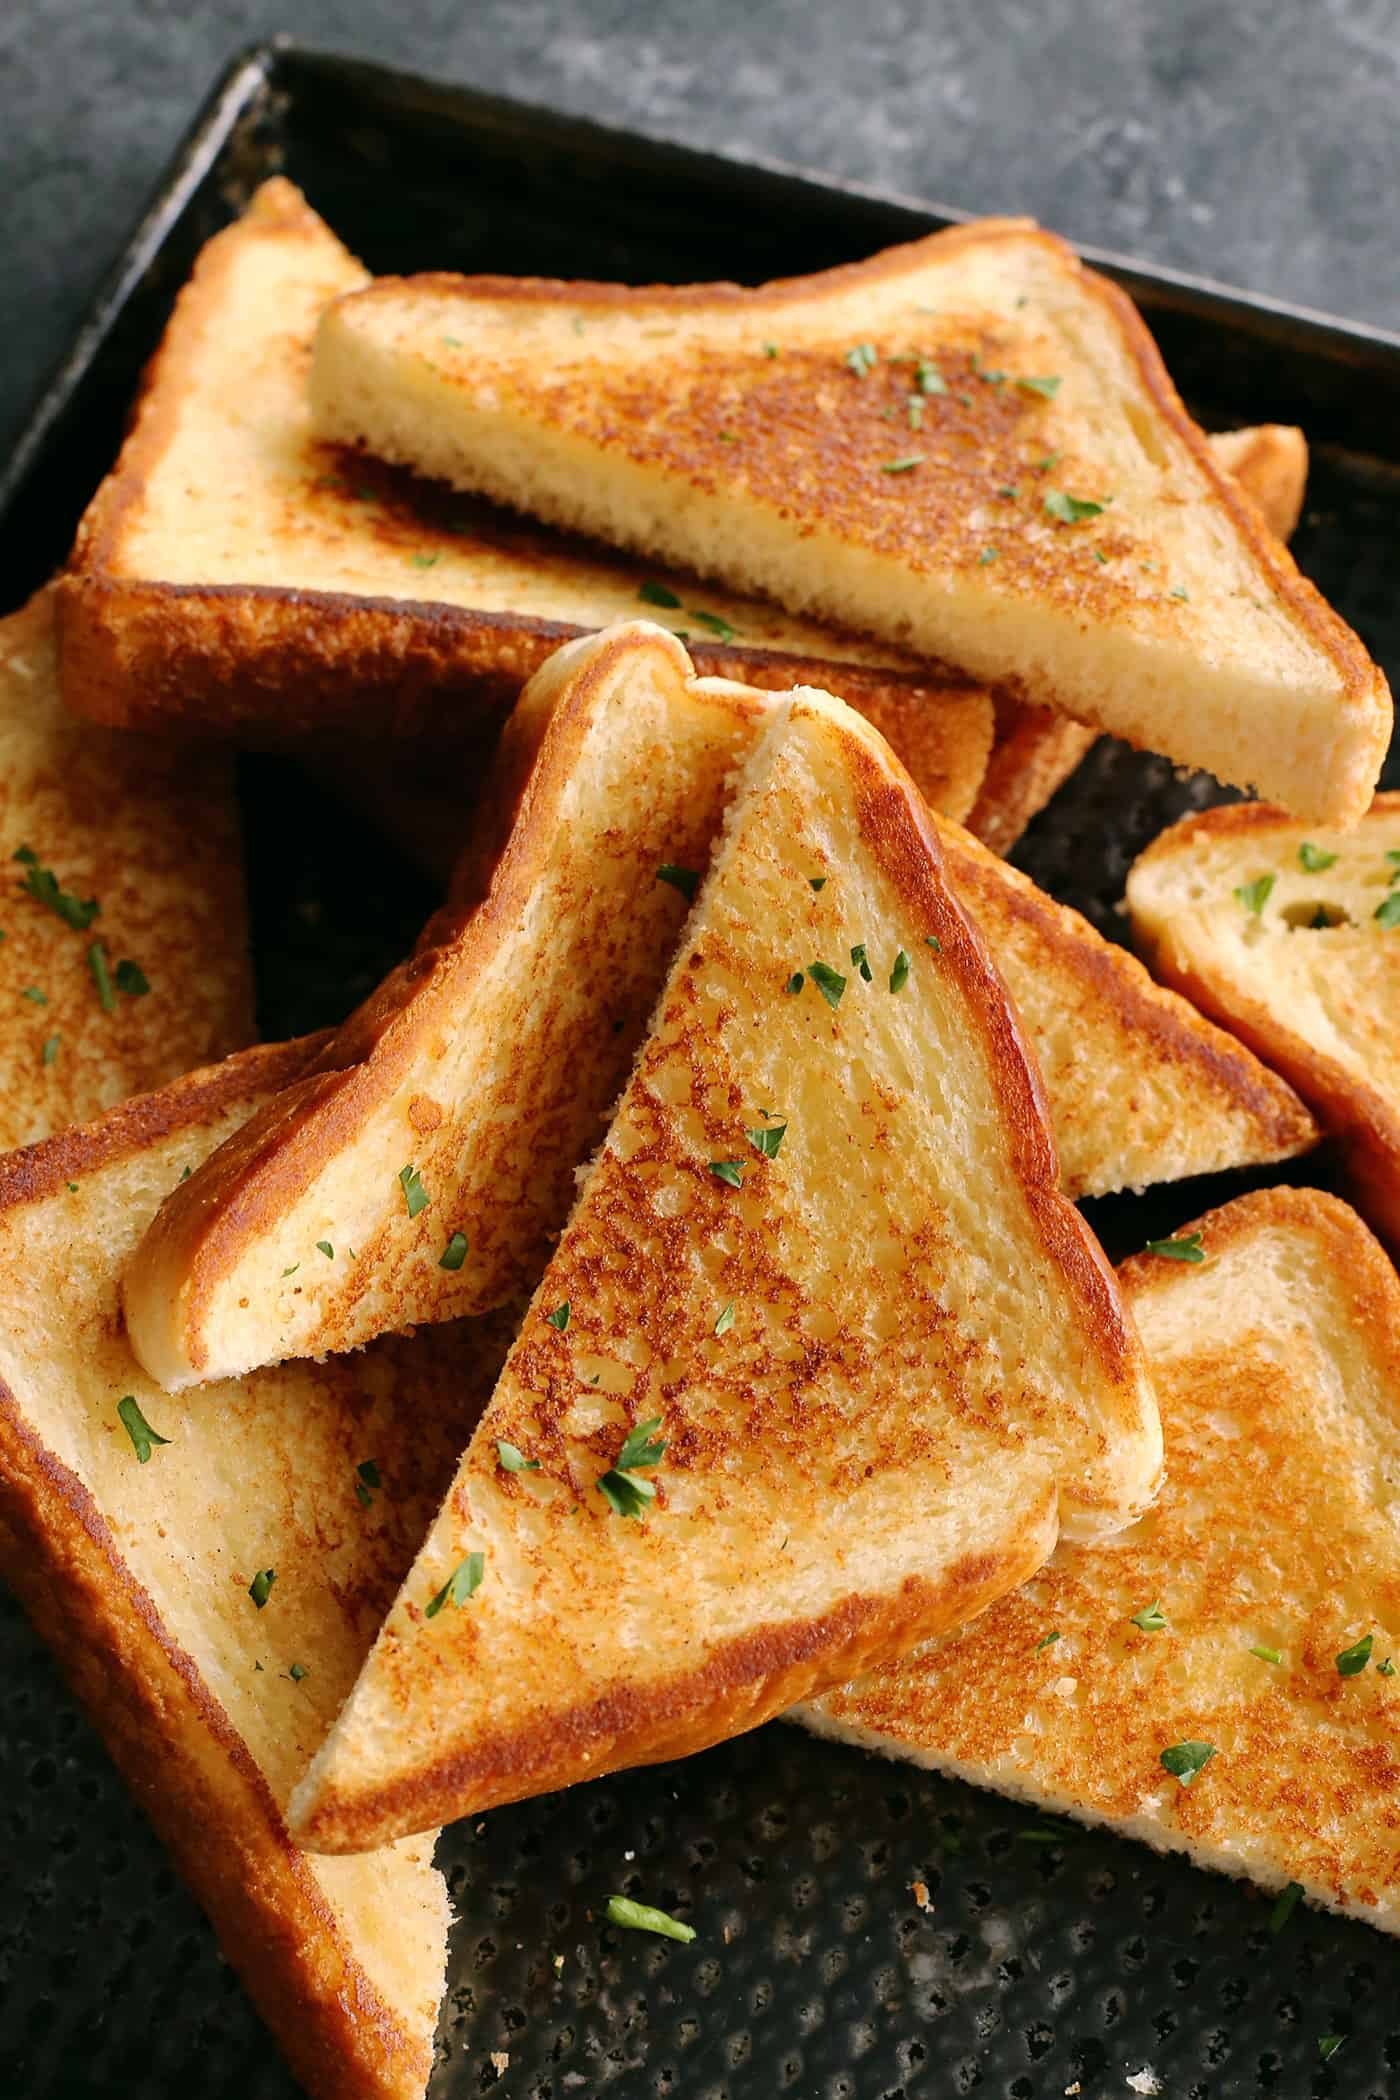 Overhead view of slices of Texas Toast garlic bread